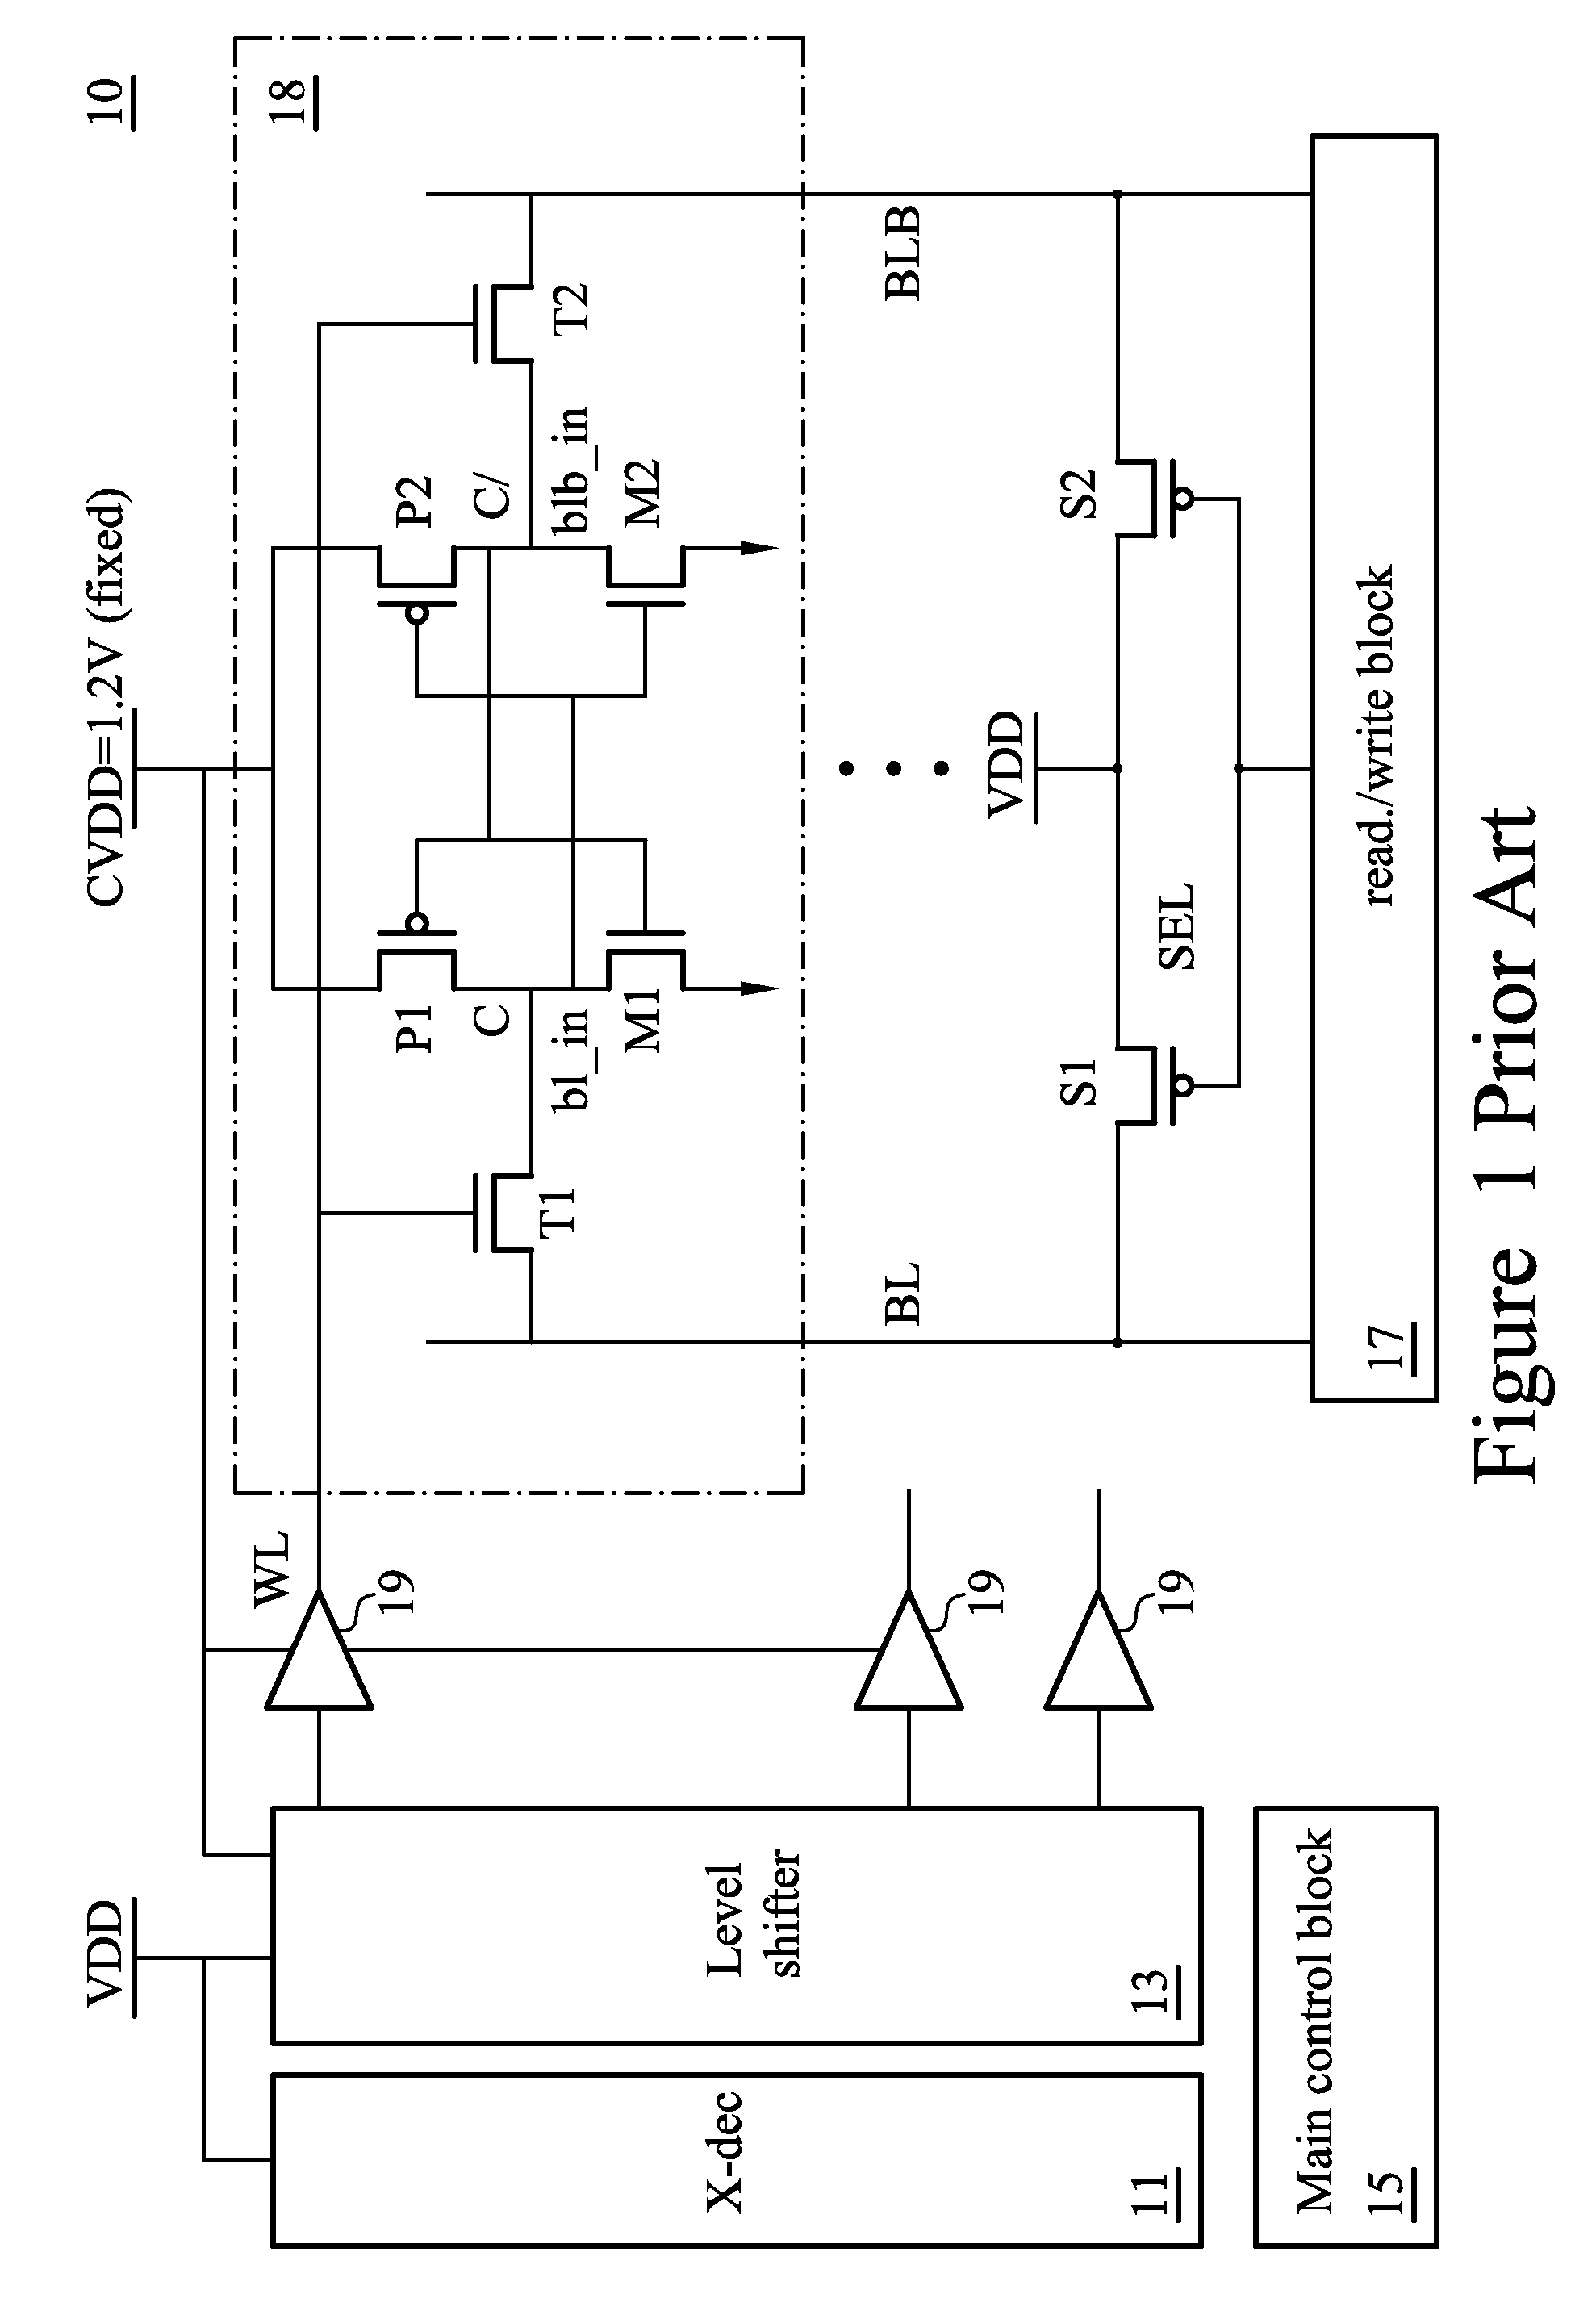 Circuit and method for VDD-tracking CVDD voltage supply